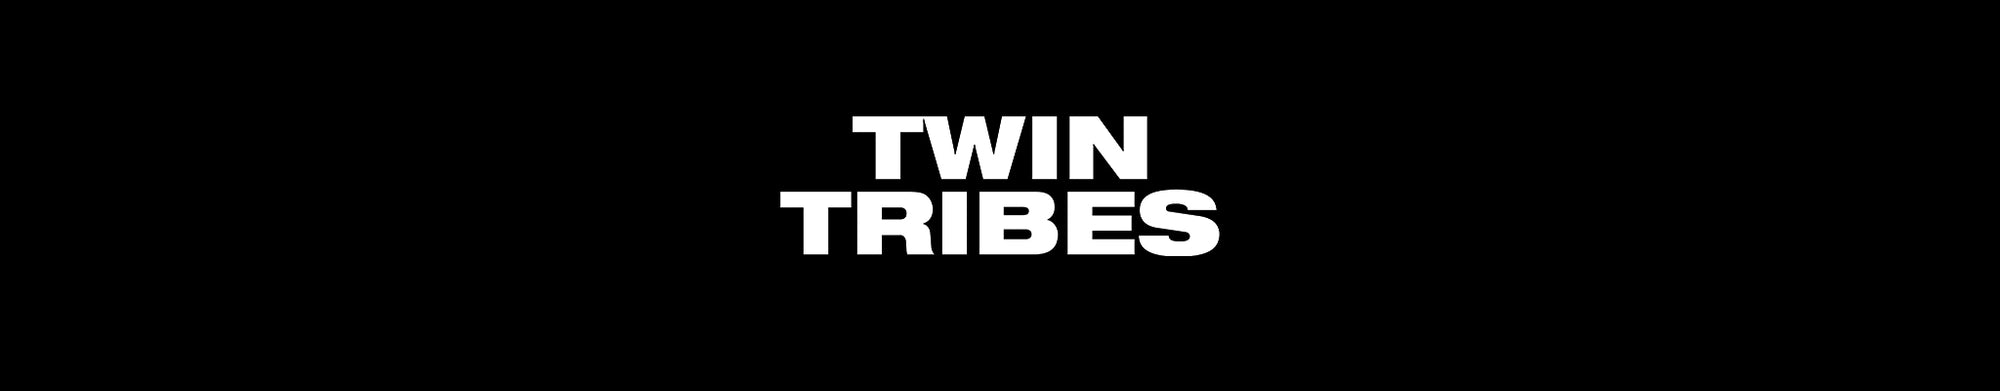 TWIN TRIBES